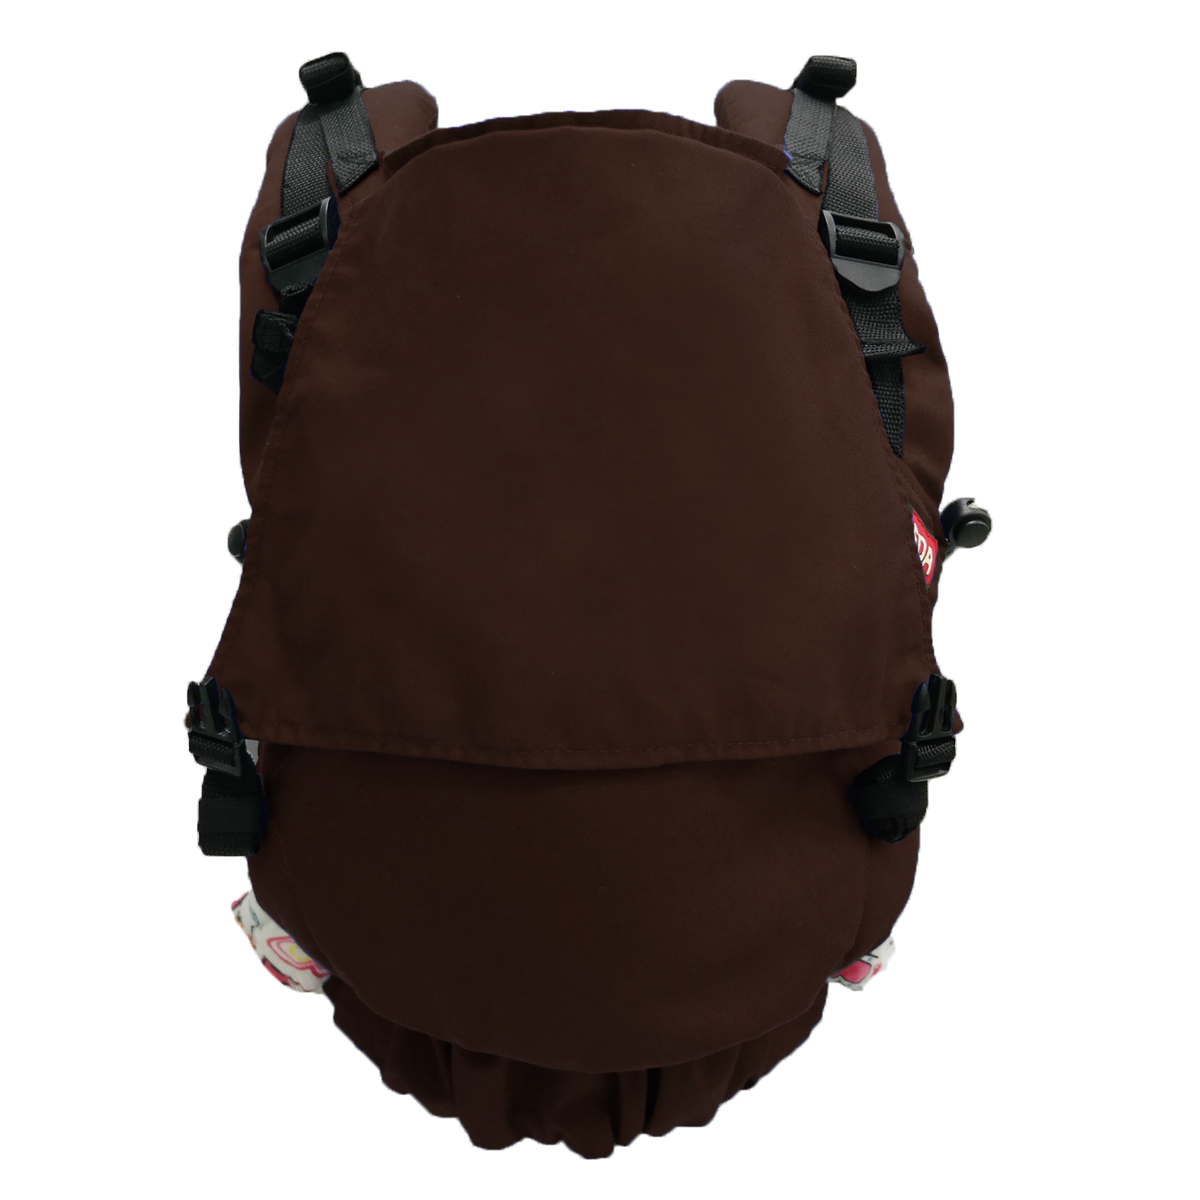 Tugeda iDEAL Soft Structured Carrier